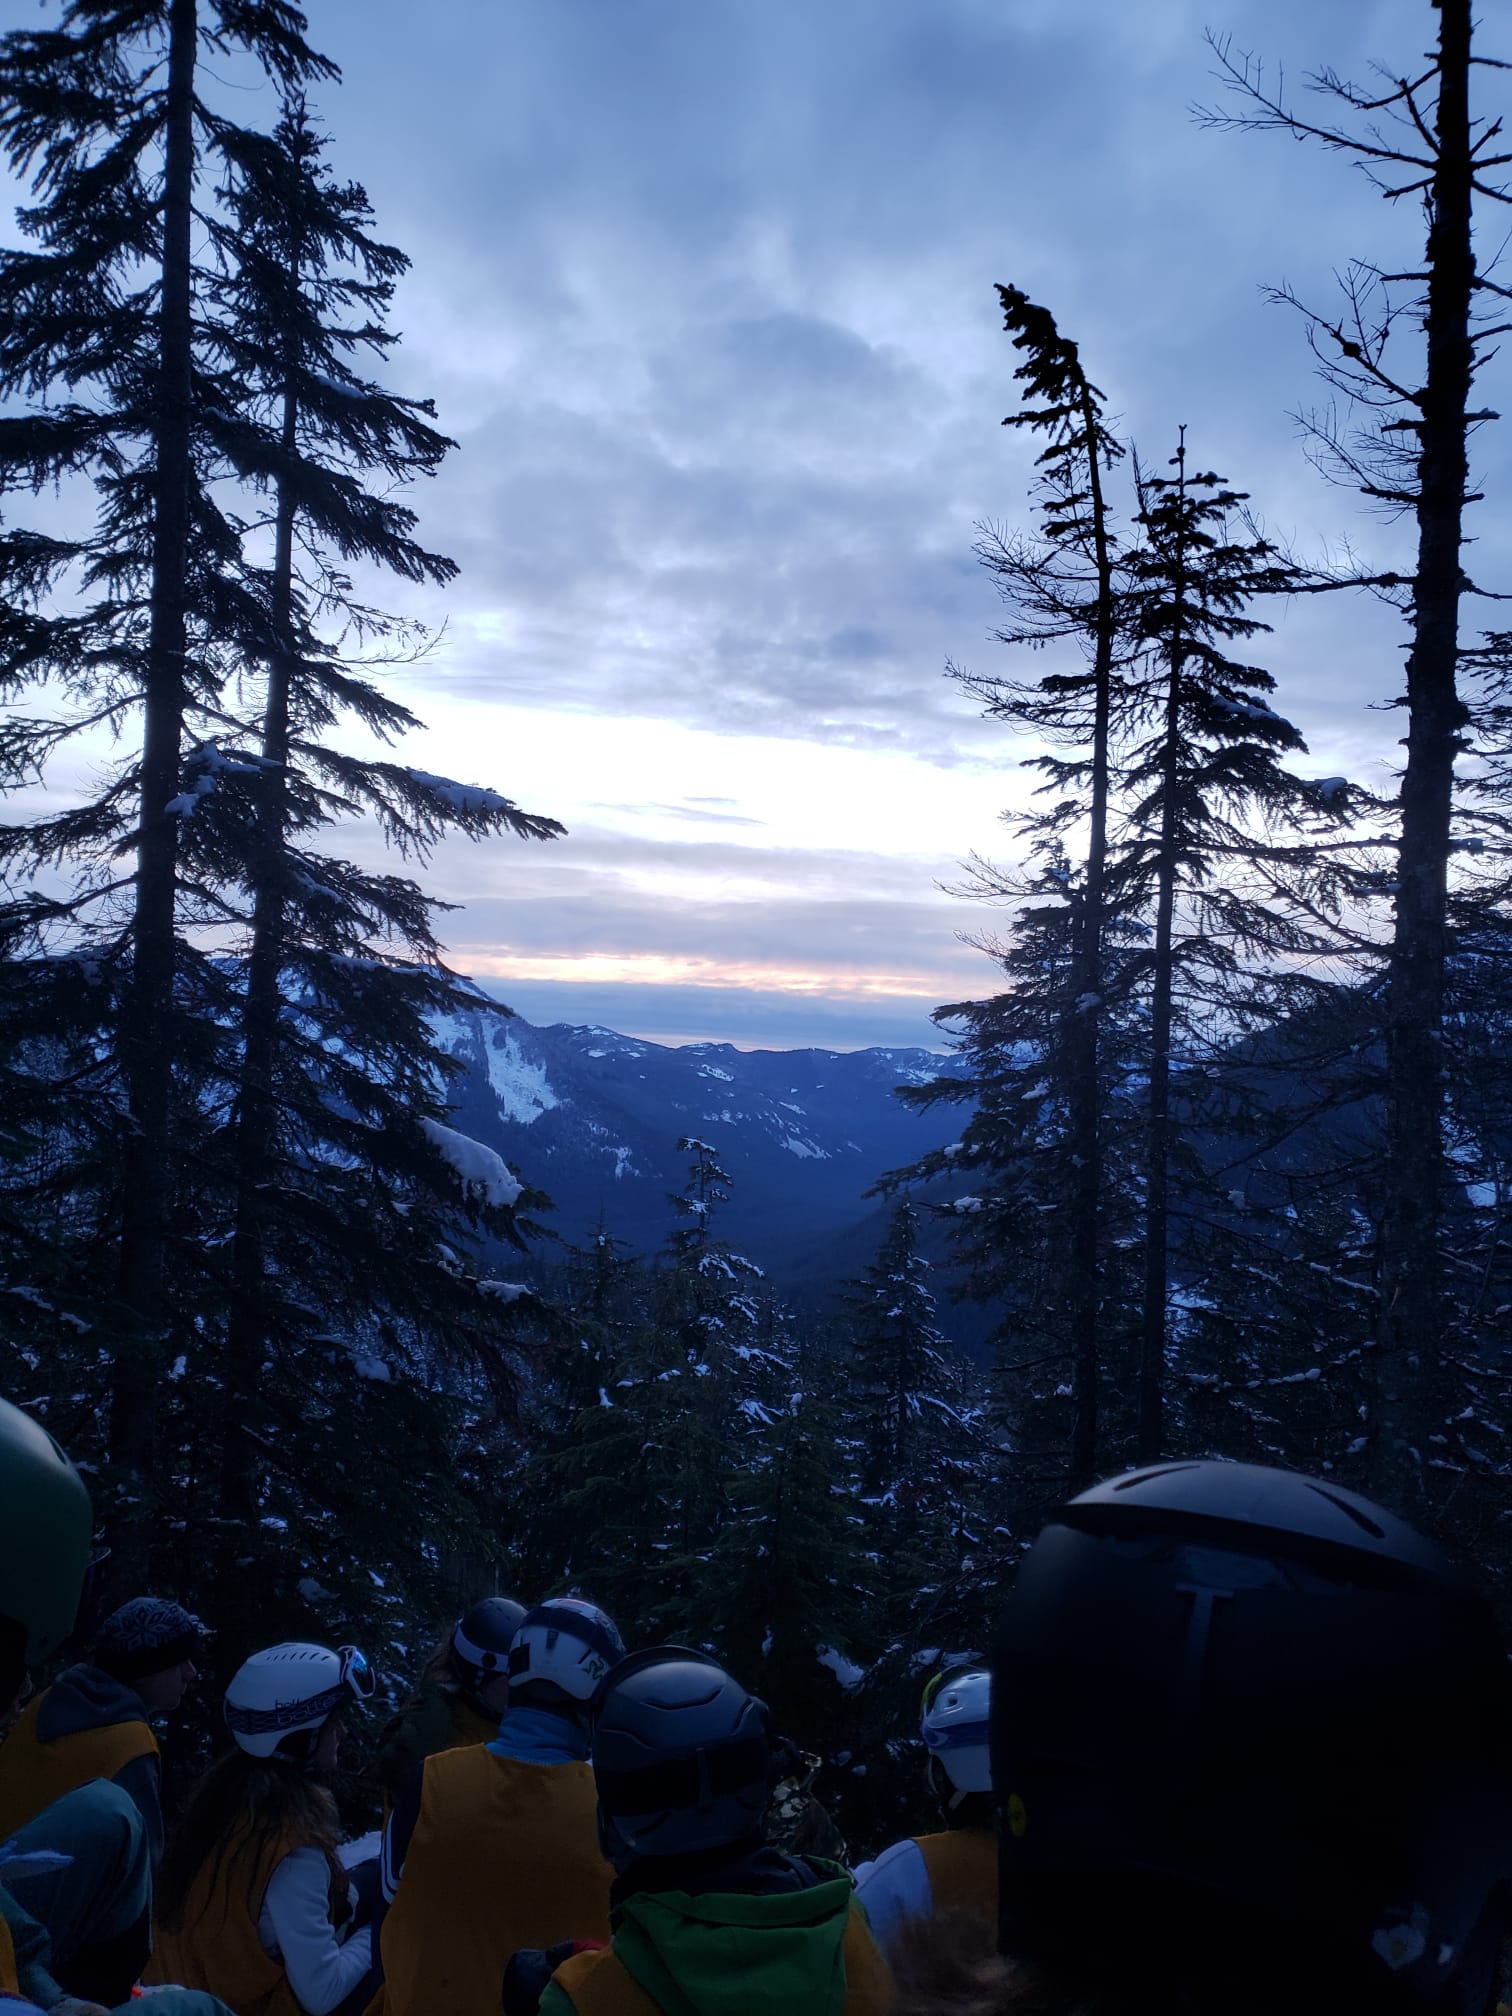 Husky Winter Sports members watching the sunset on a mountain